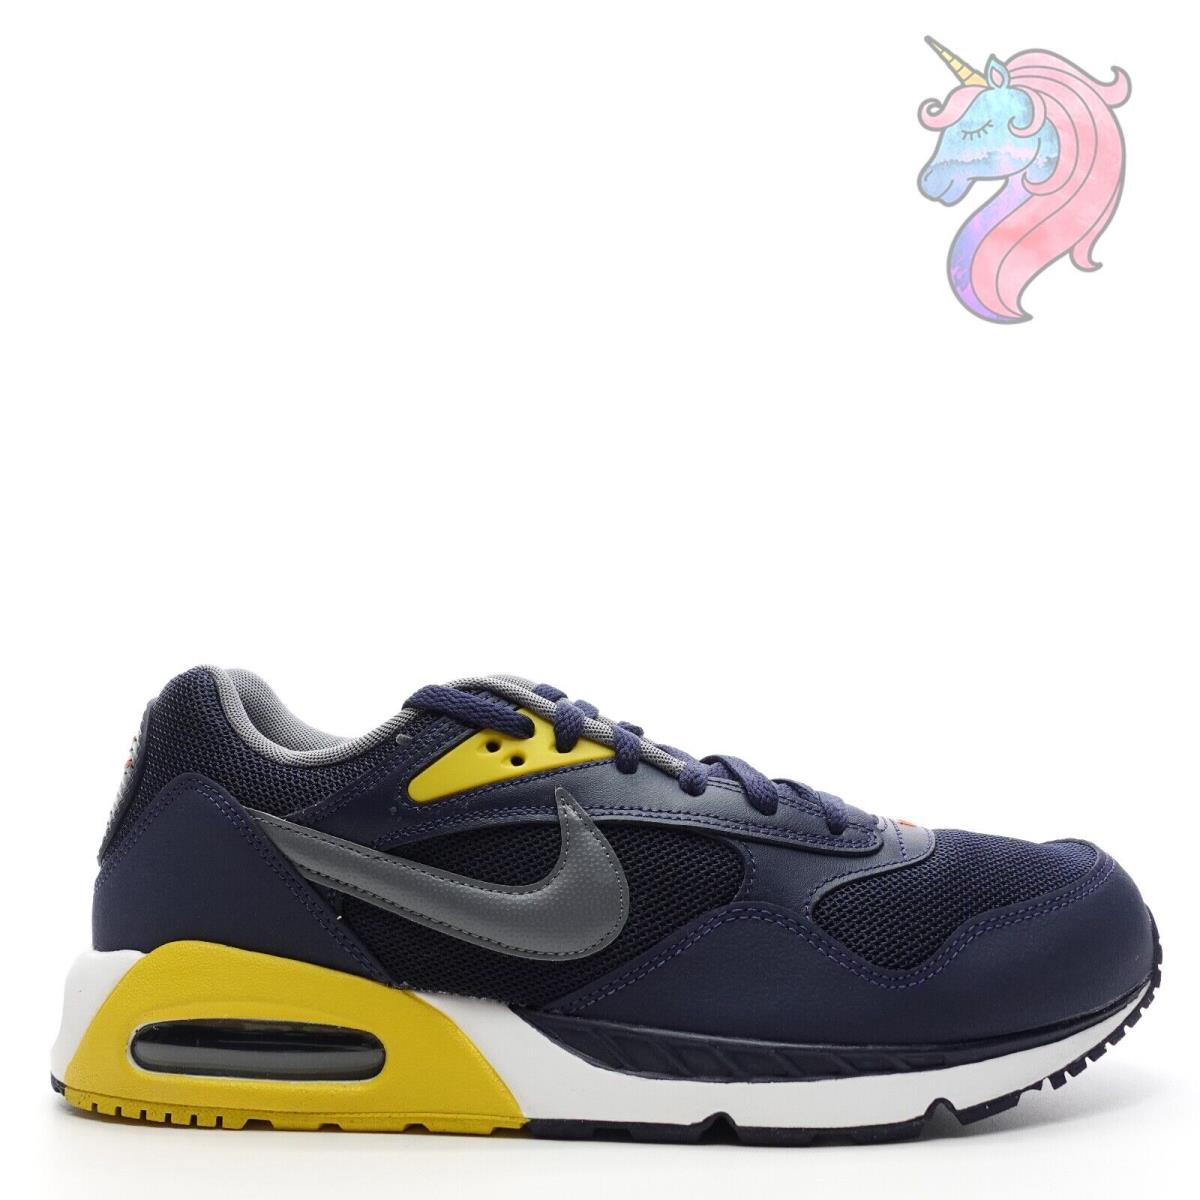 Mens Nike Air Max Correlate Size 10.5 Shoes Obsidian Blue Yellow 511416 400